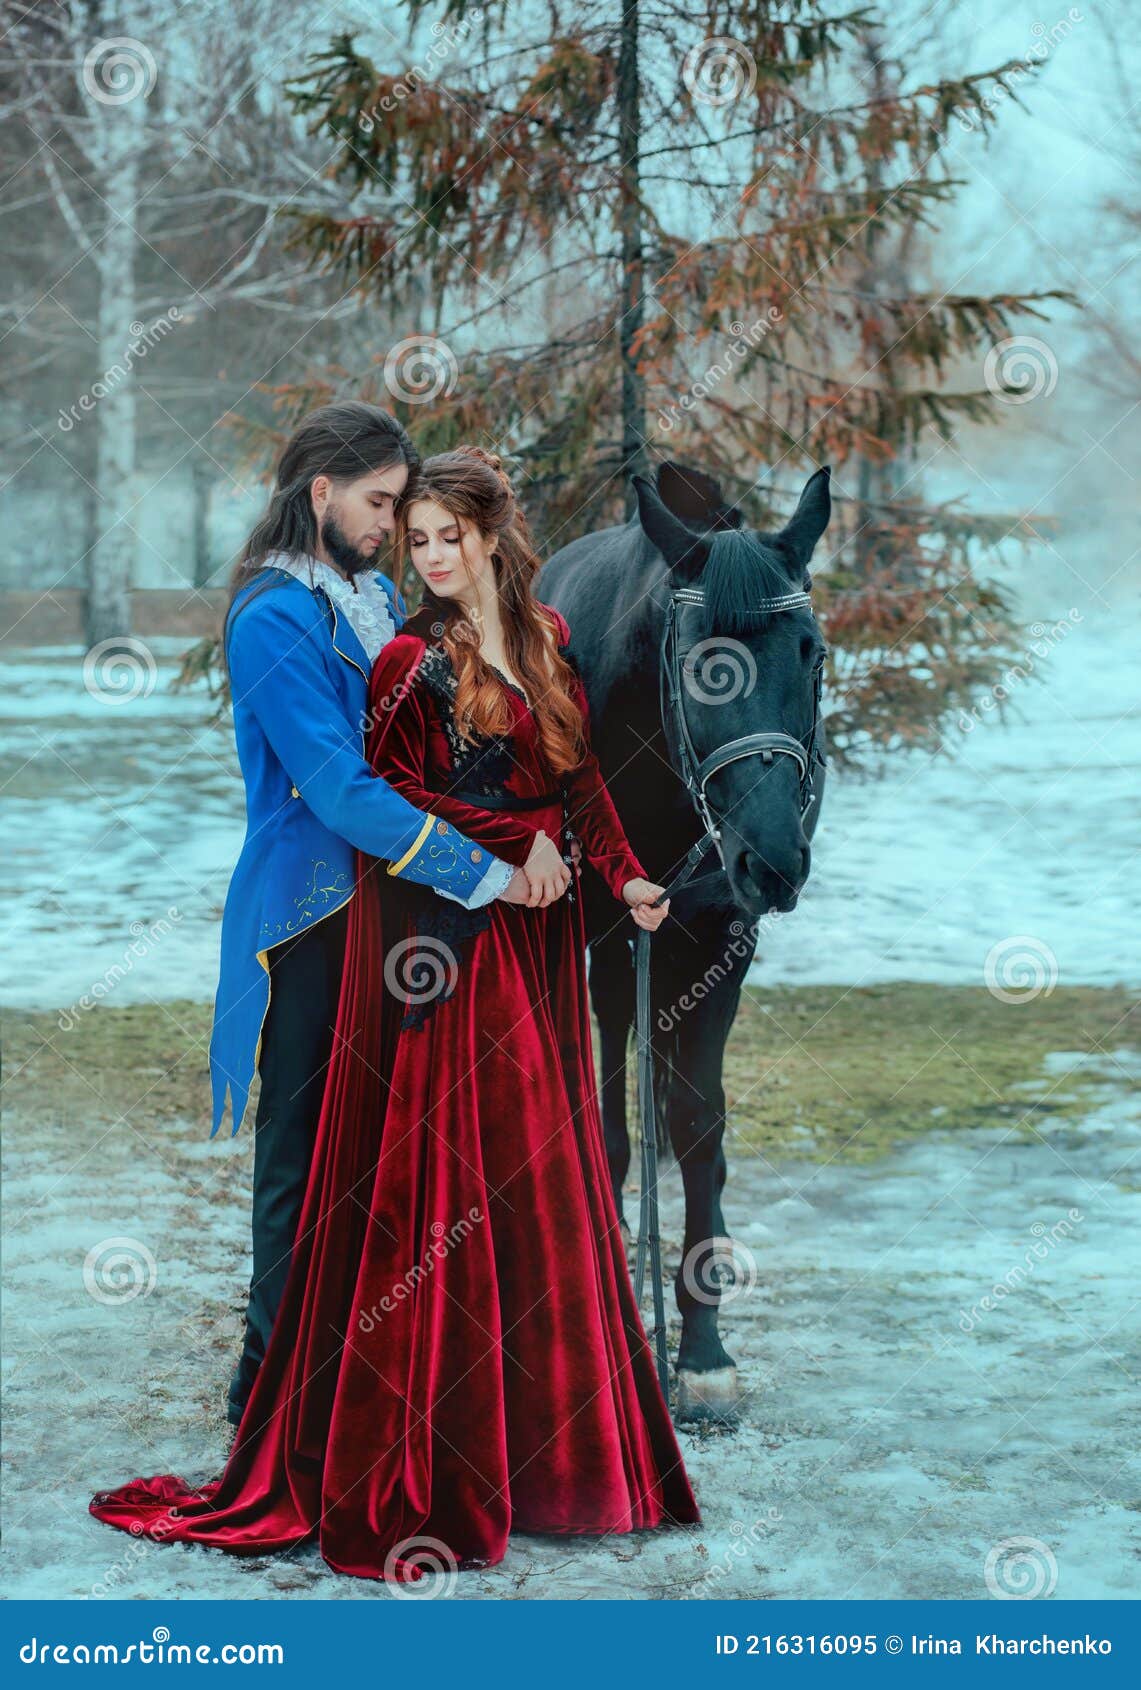 Medieval Couple in Love Man and Woman Hugging in Winter Forest. Vintage  Clothing Red Long Dress. Blue Frock Coat Costume Stock Image - Image of  horse, history: 216316095